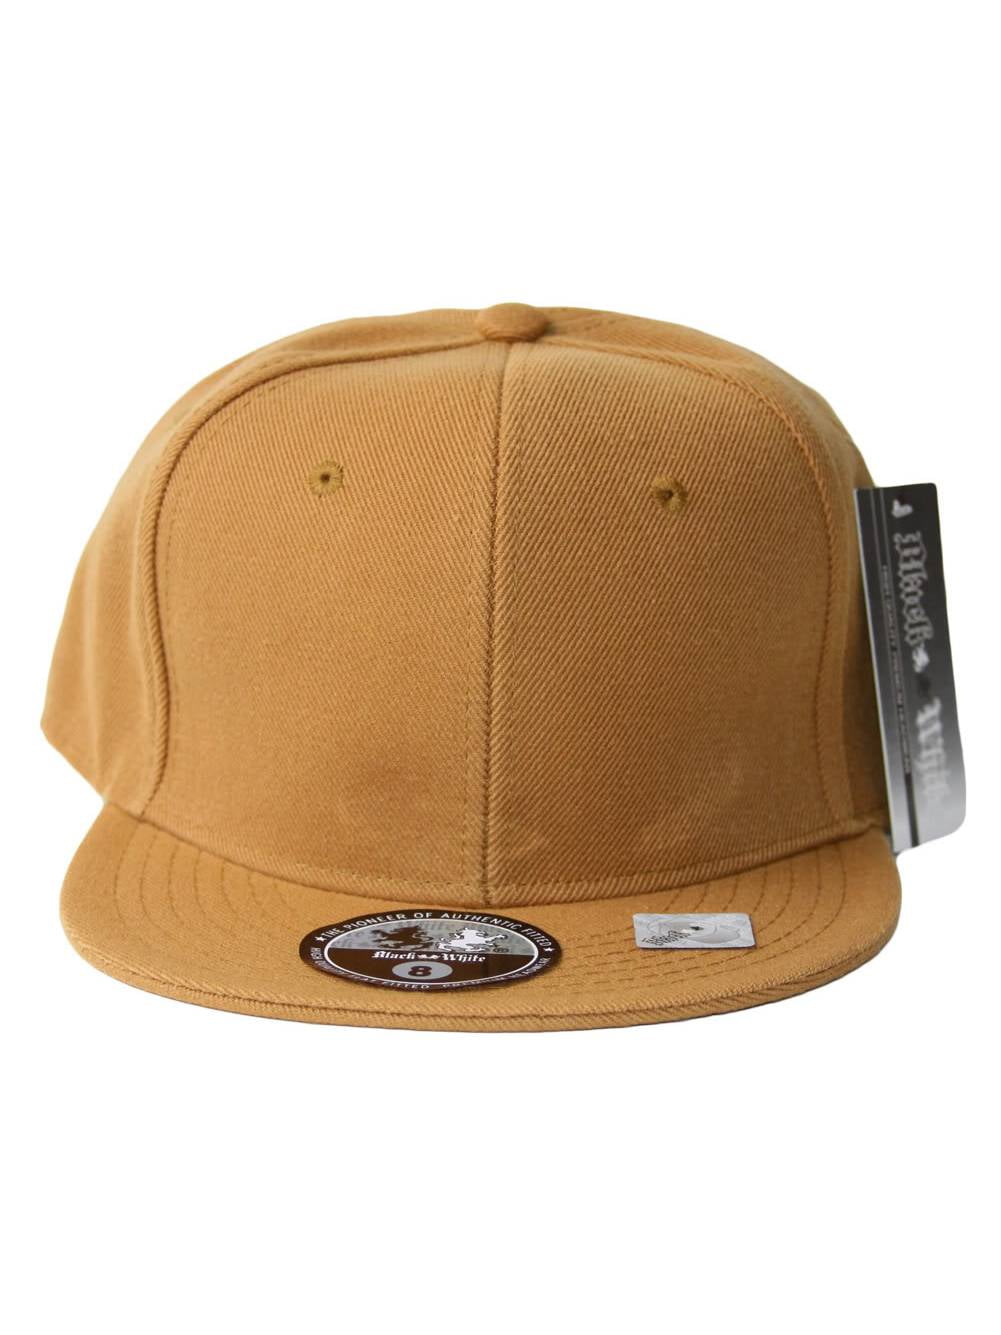 Fitted Acrylic Plain Style Light Brown Hat 8 